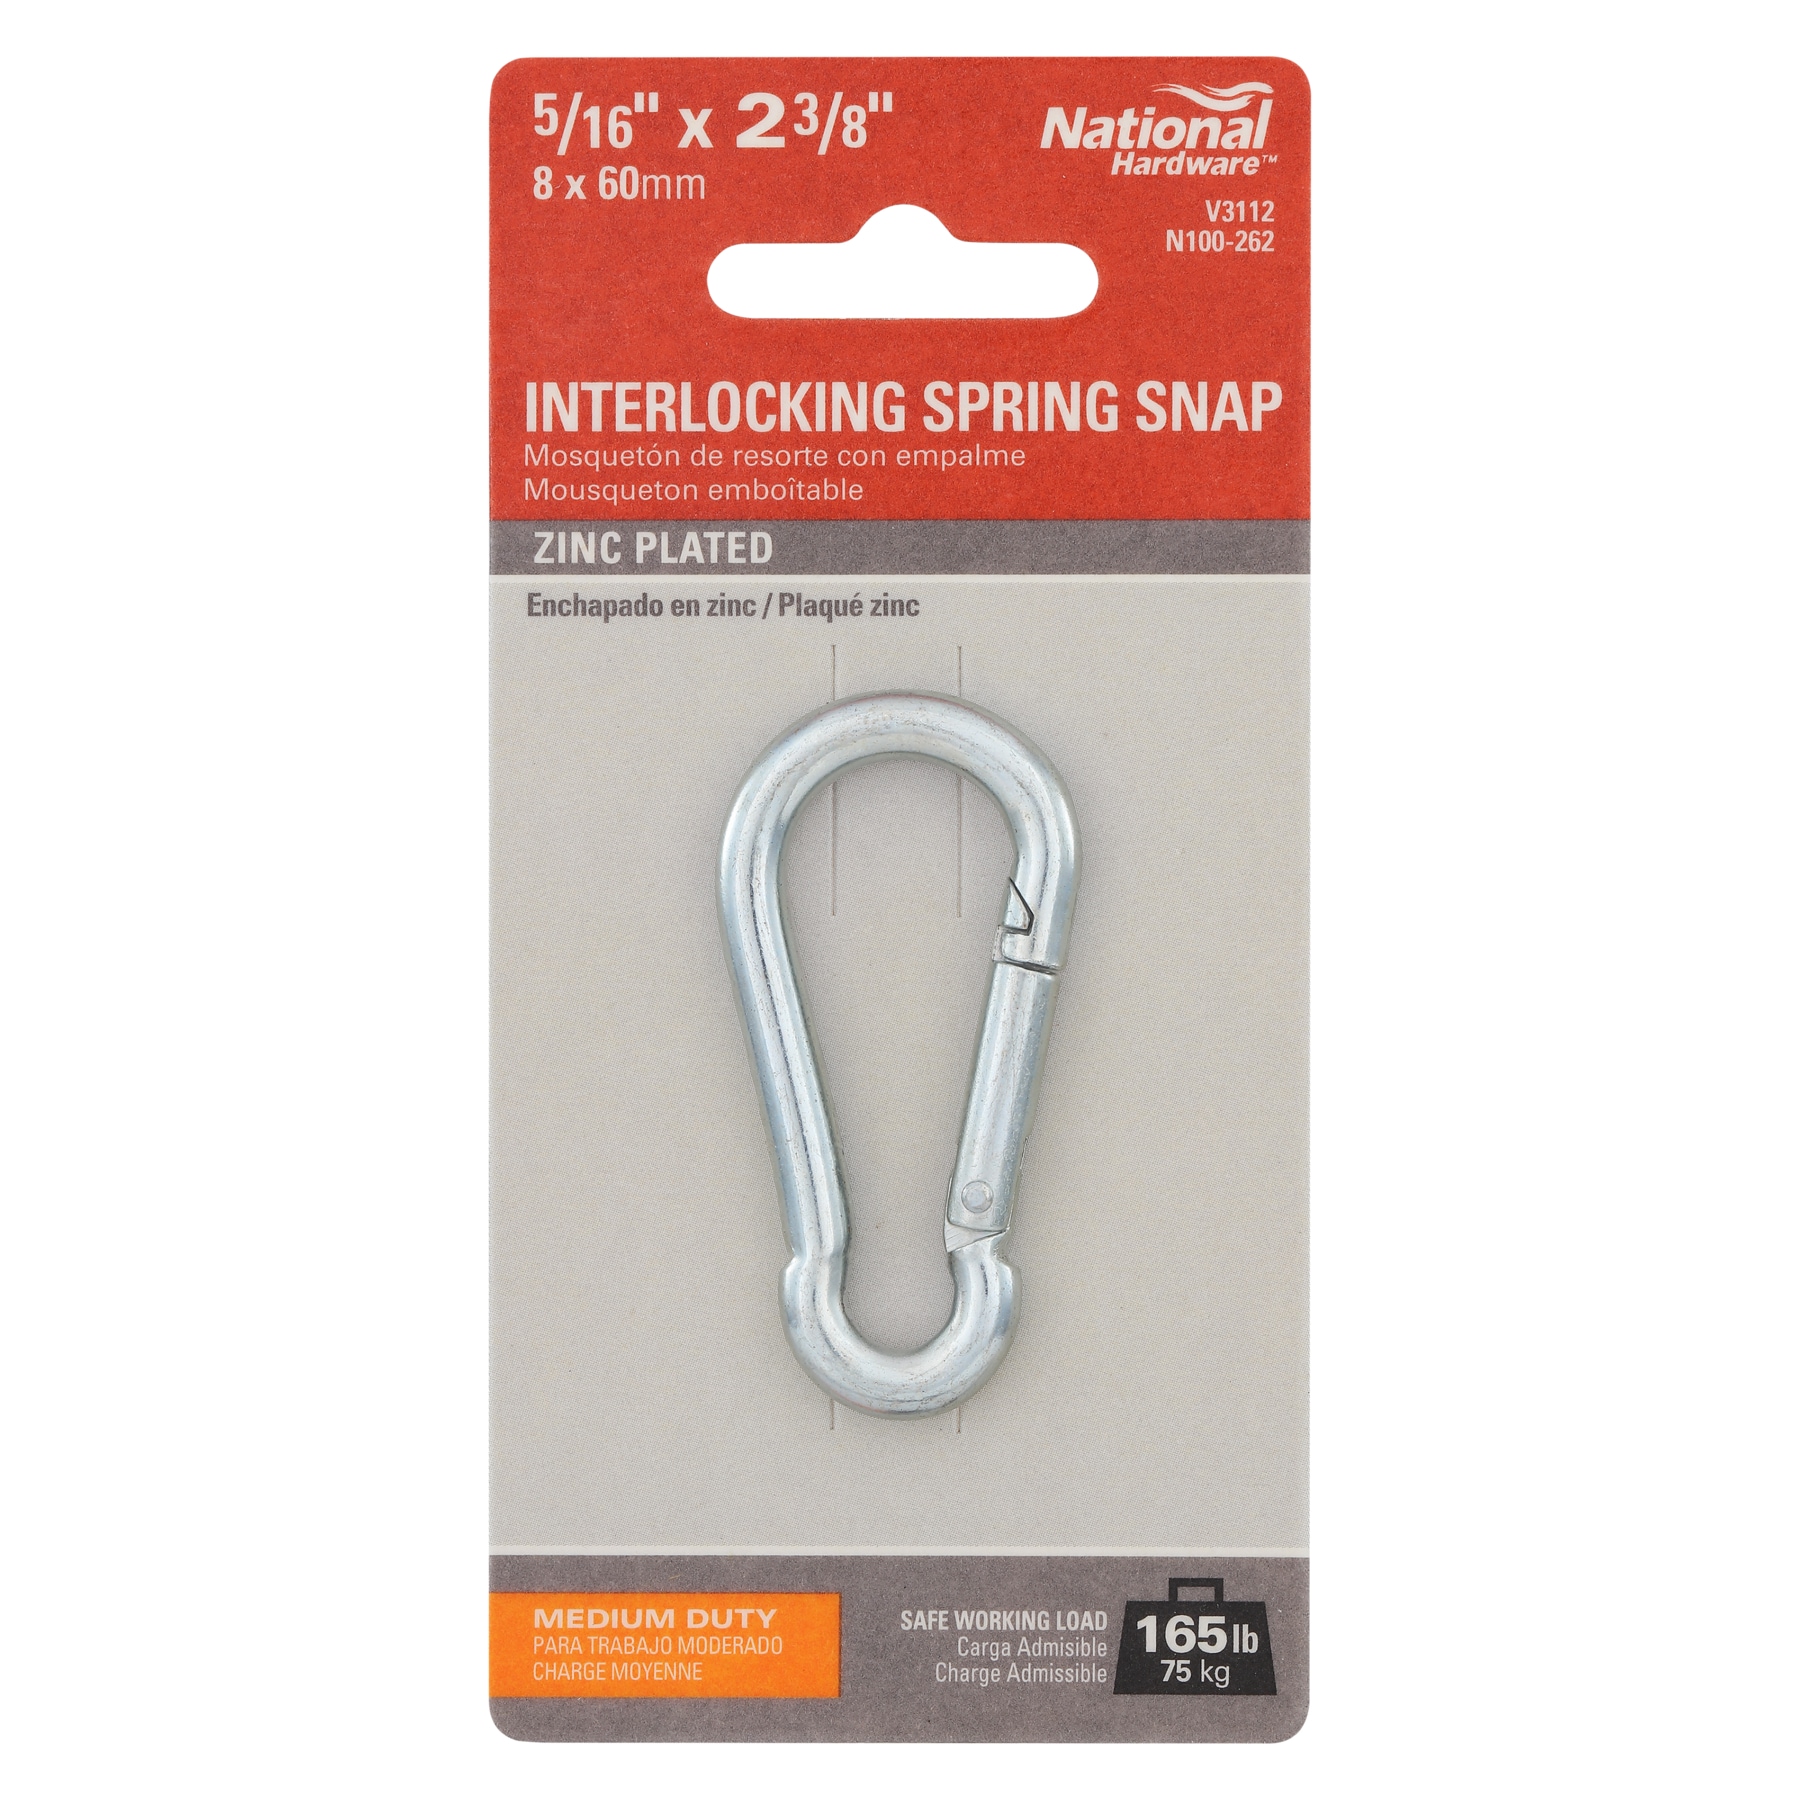 National Hardware N100-262- 5/16-in x 2-3/8-in Interlocking Spring Snap in  Zinc Plated